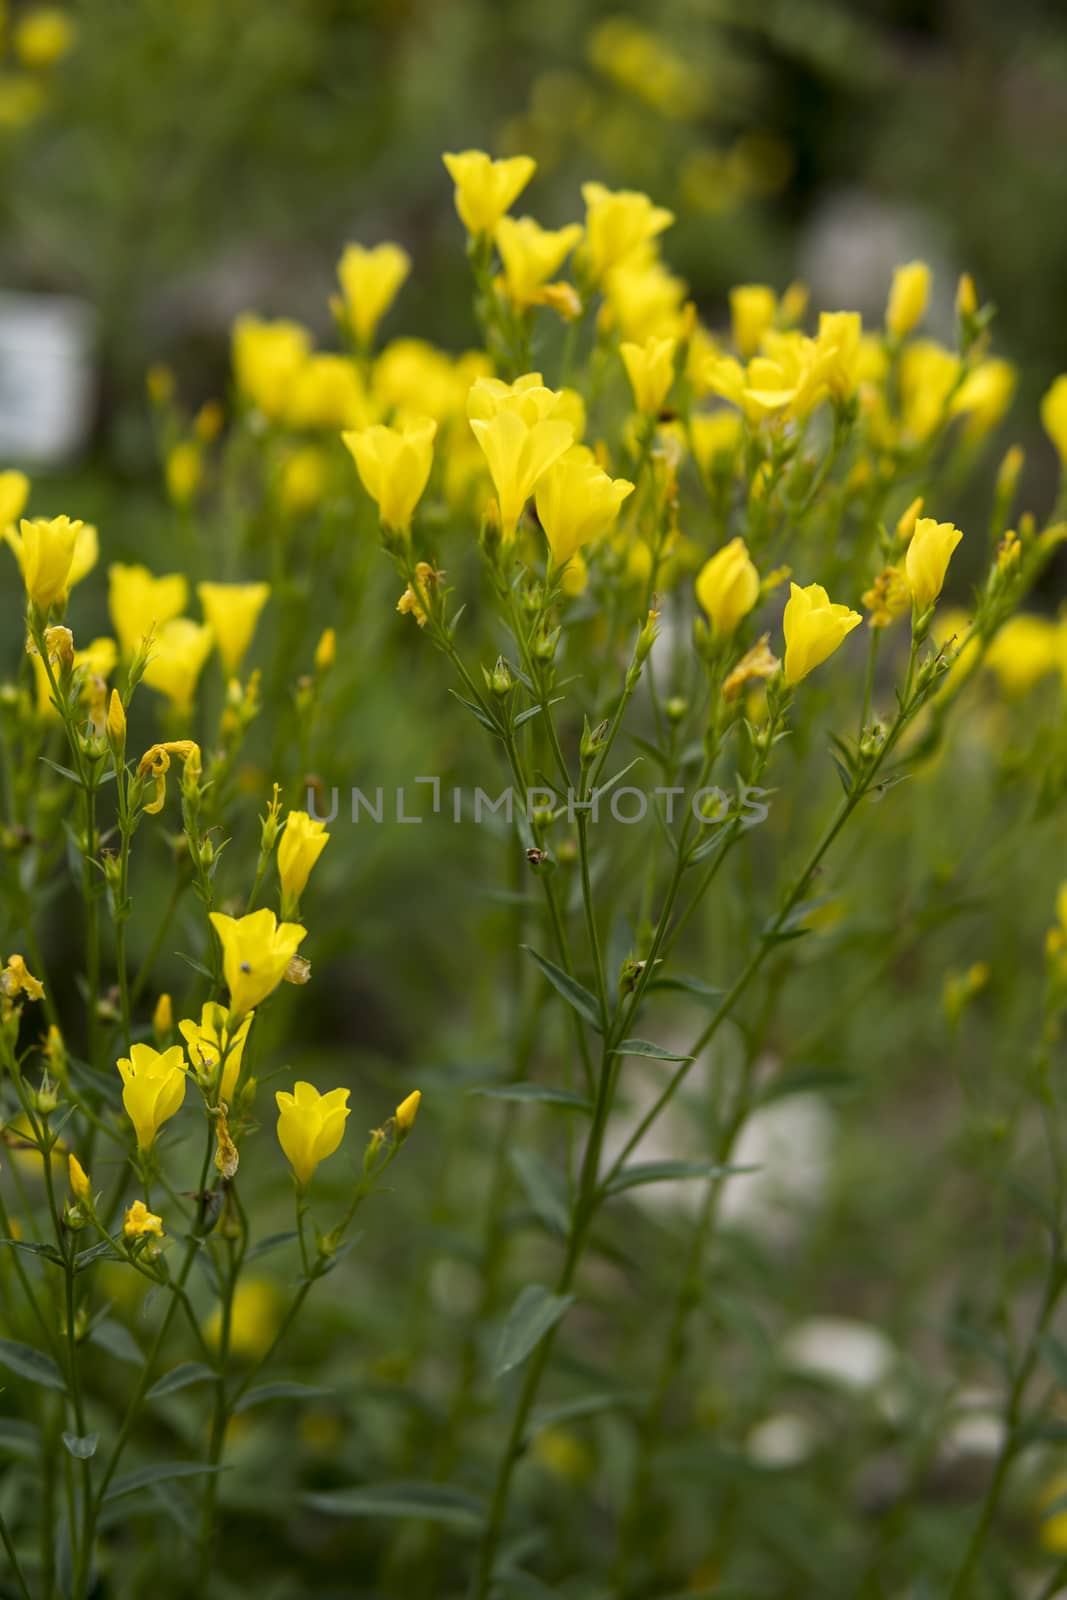 detail of small yellow flowers growing in a garden during summer season